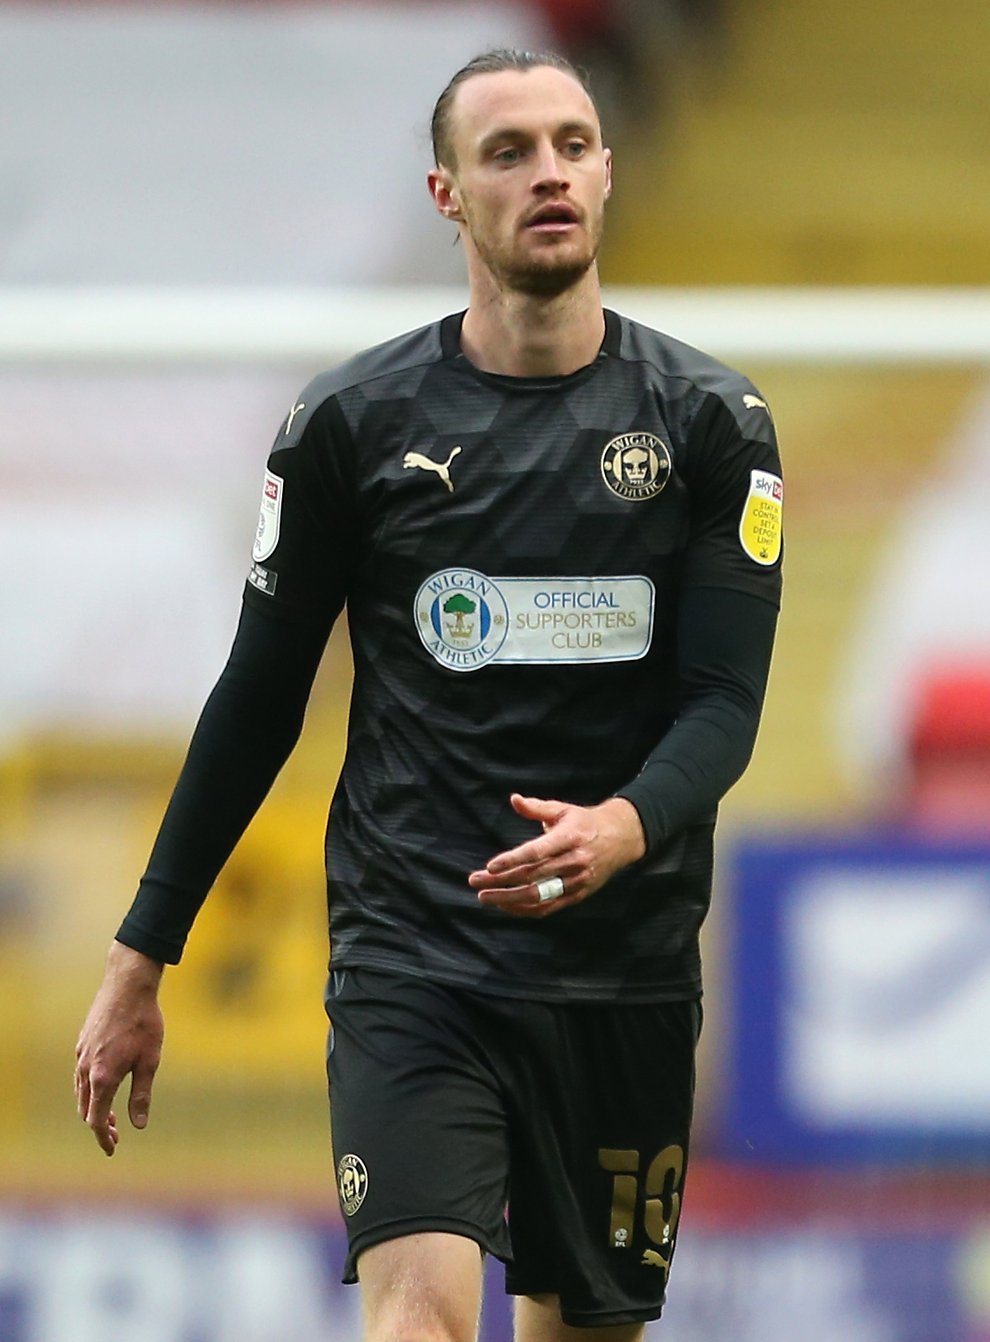 Wigan’s Will Keane has been called up by the Republic of Ireland for the first time (Steven Paston/PA)